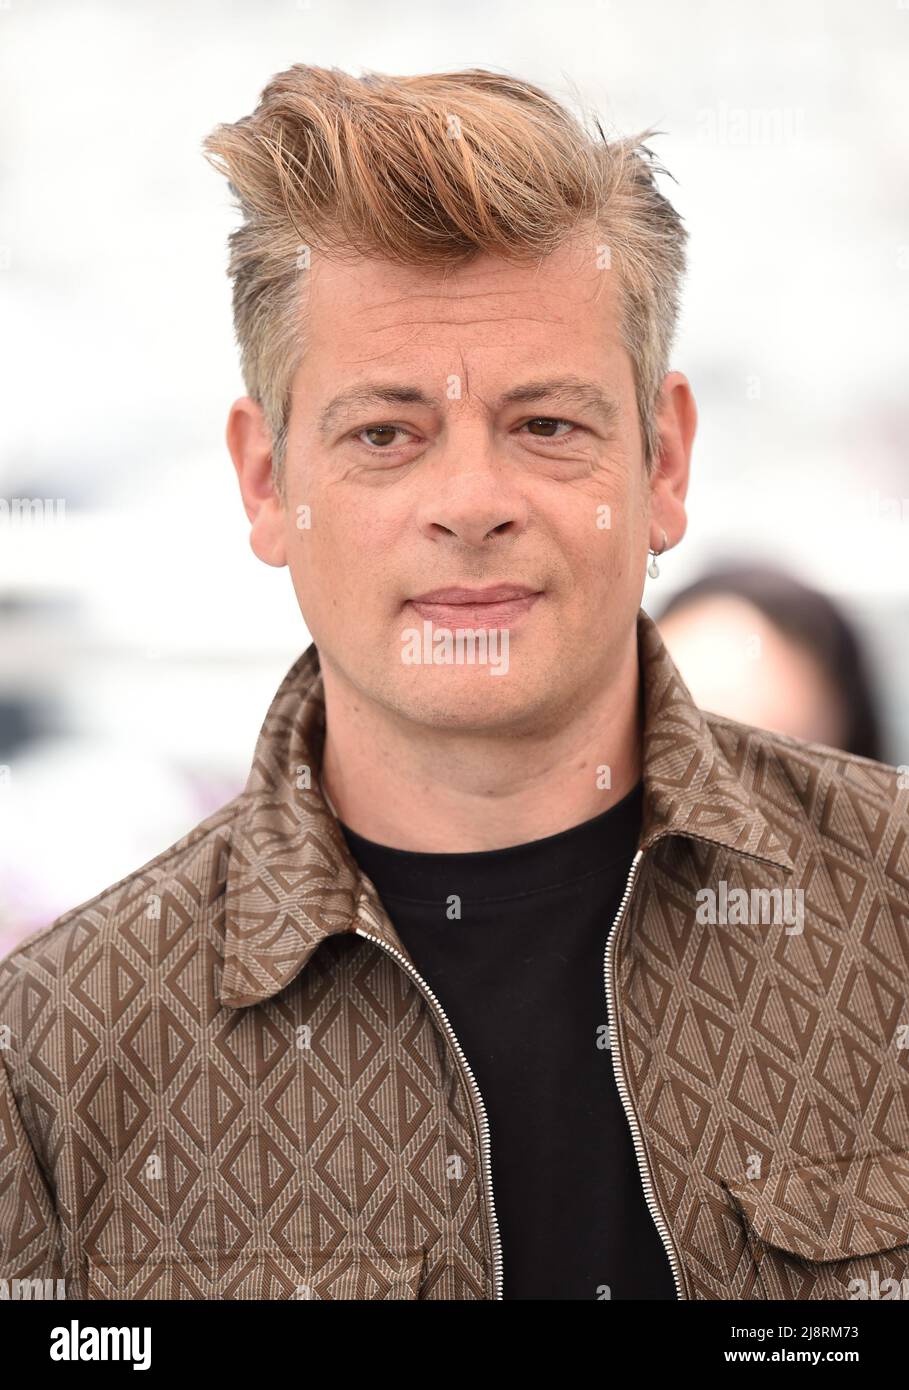 Cannes, France. 18th May, 2022. May 18th, 2022. Cannes, France. Benjamin Biolay attending the Un Certain Regard Jury photocall, part of the 75th Cannes Film Festival, Palais de Festival, Cannes. Credit: Doug Peters/Alamy Live News Stock Photo